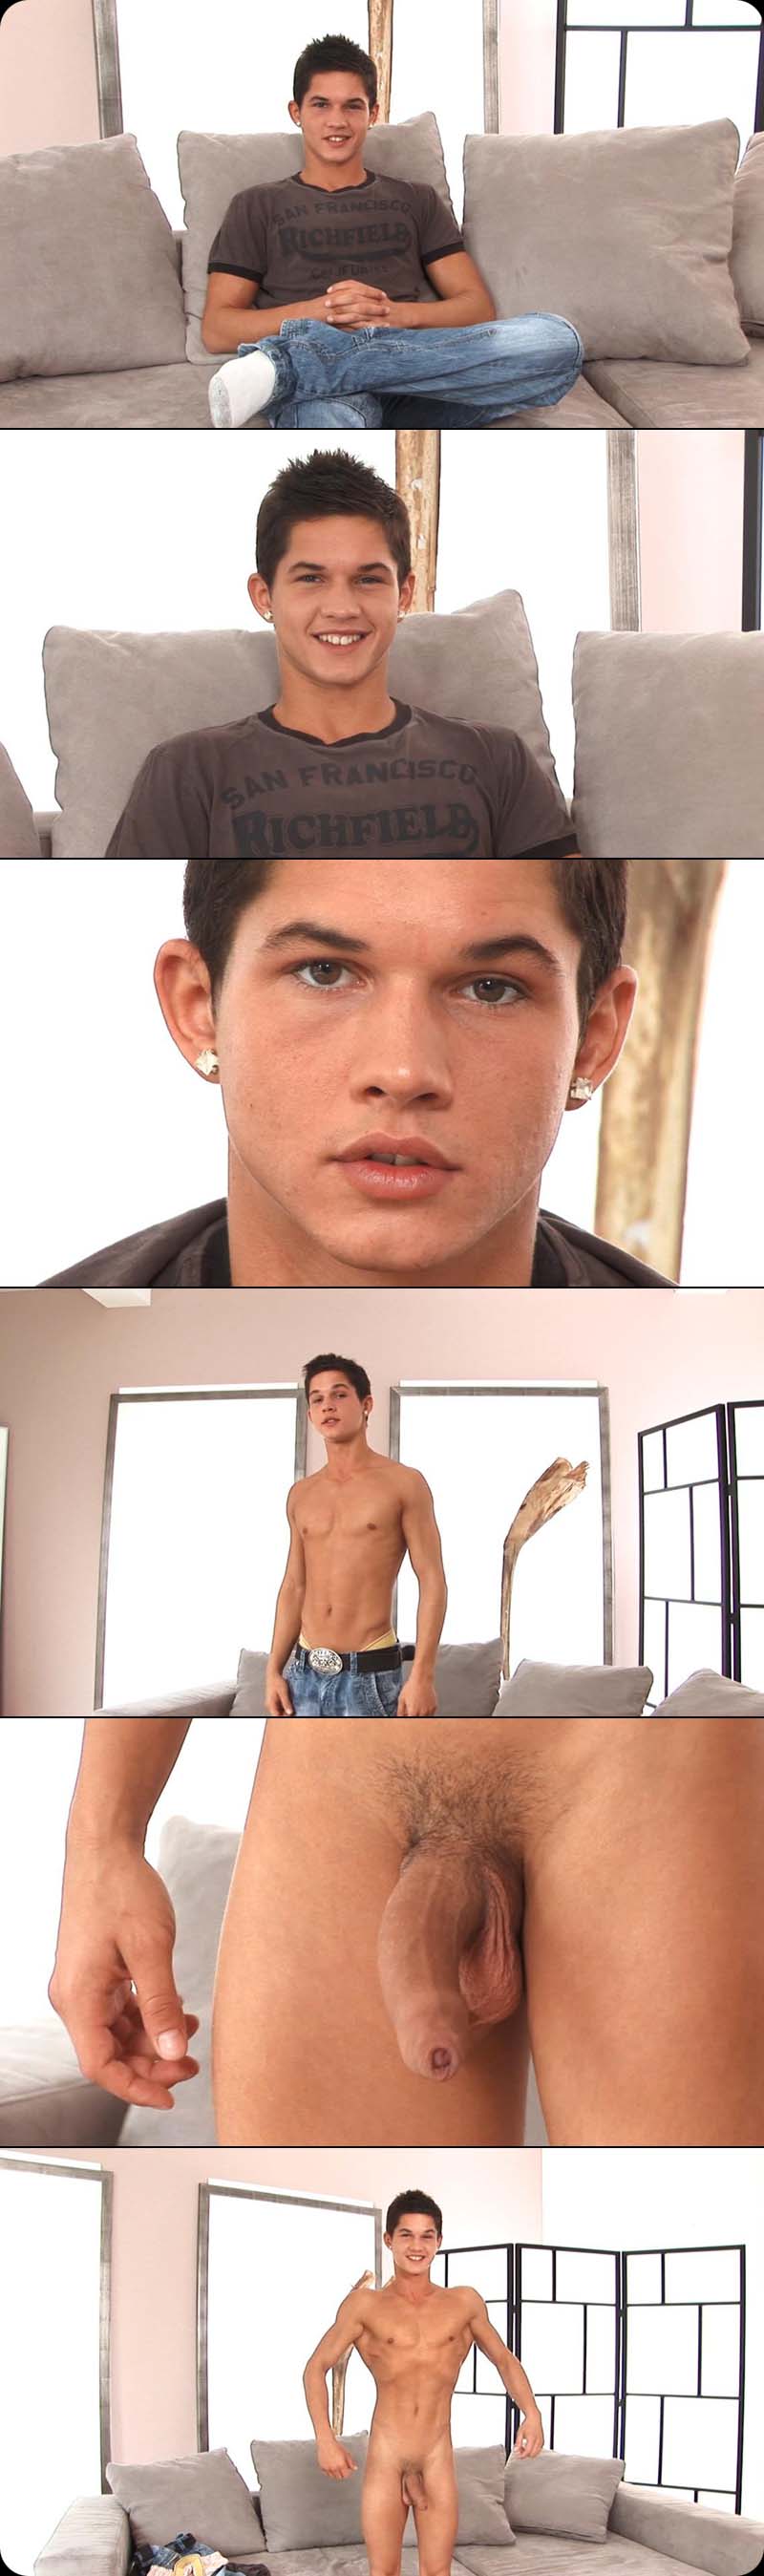 Thomas Woolf at BelAmiOnline.com